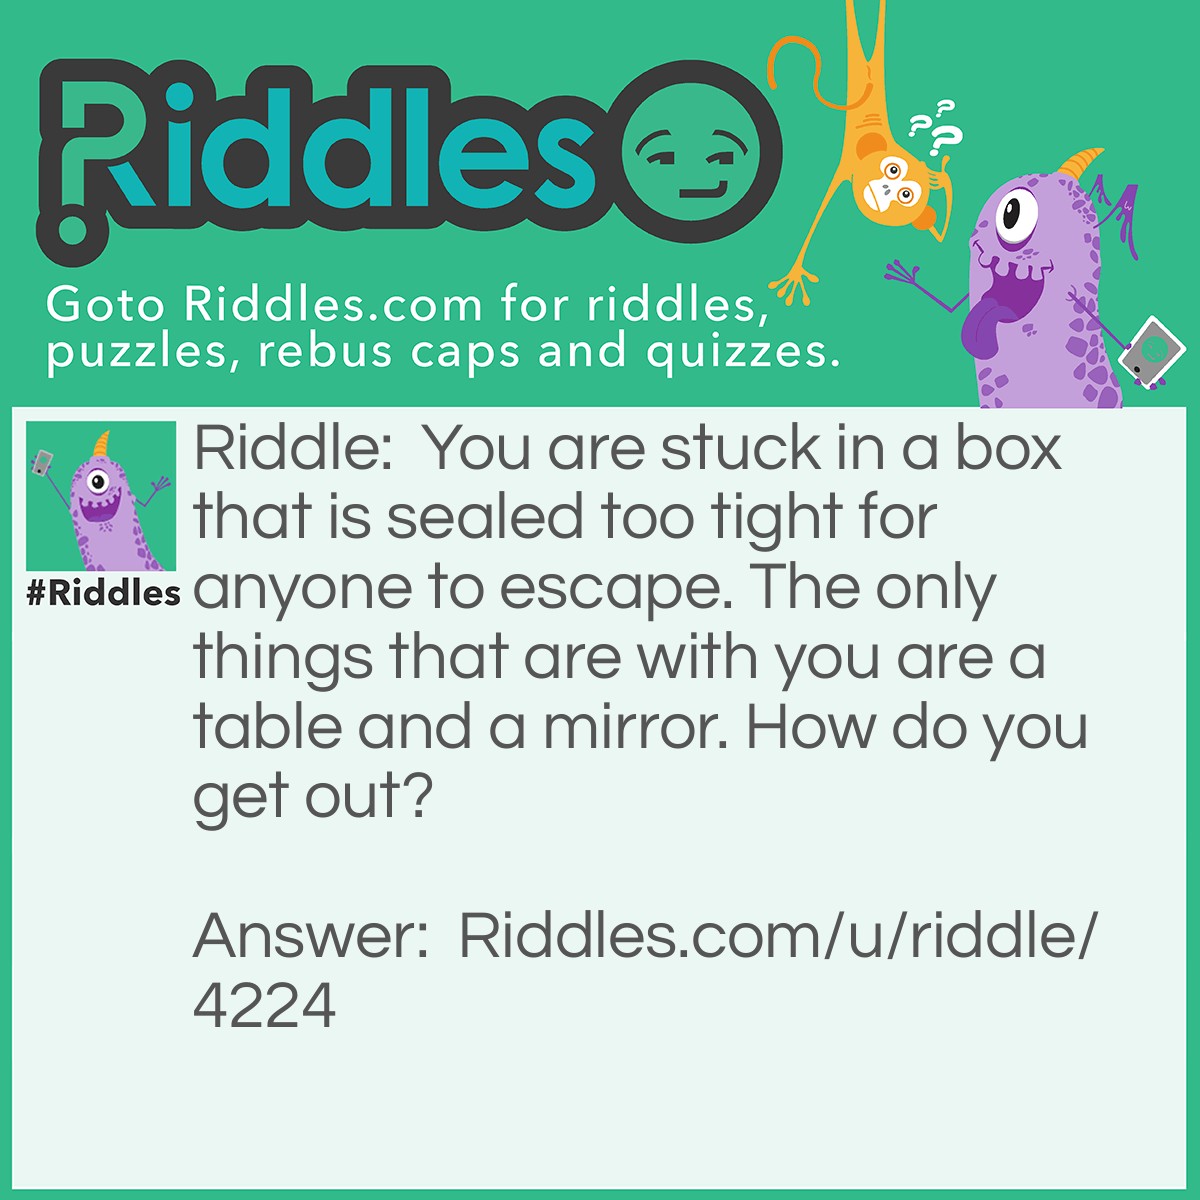 Riddle: You are stuck in a box that is sealed too tight for anyone to escape. The only things that are with you are a table and a mirror. How do you get out? Answer: Look in the mirror, see what you saw, take the saw, cut the table in half, two halves of a whole, go through the hole.